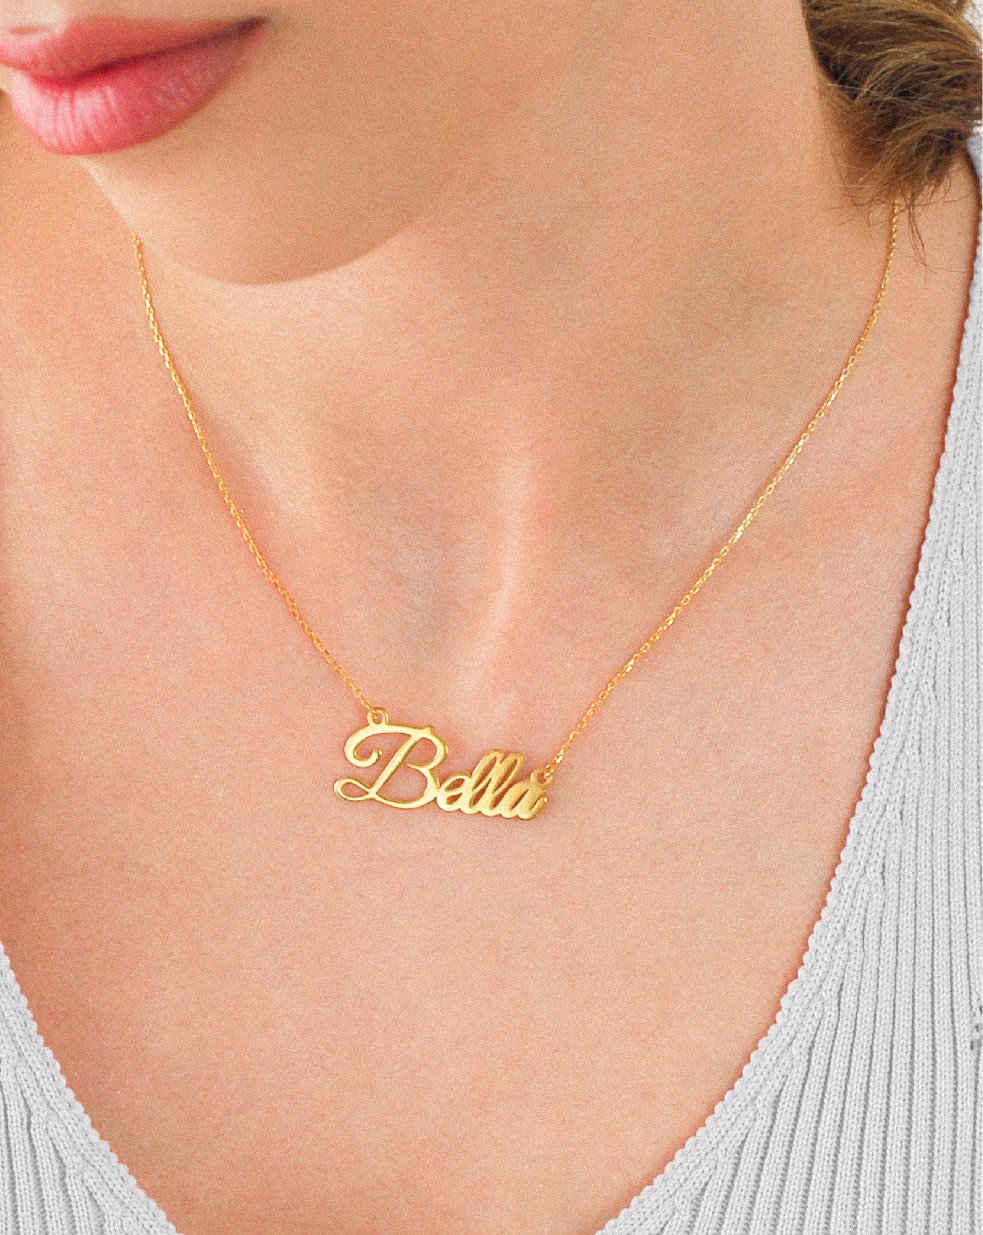 personalized-name-necklace-min